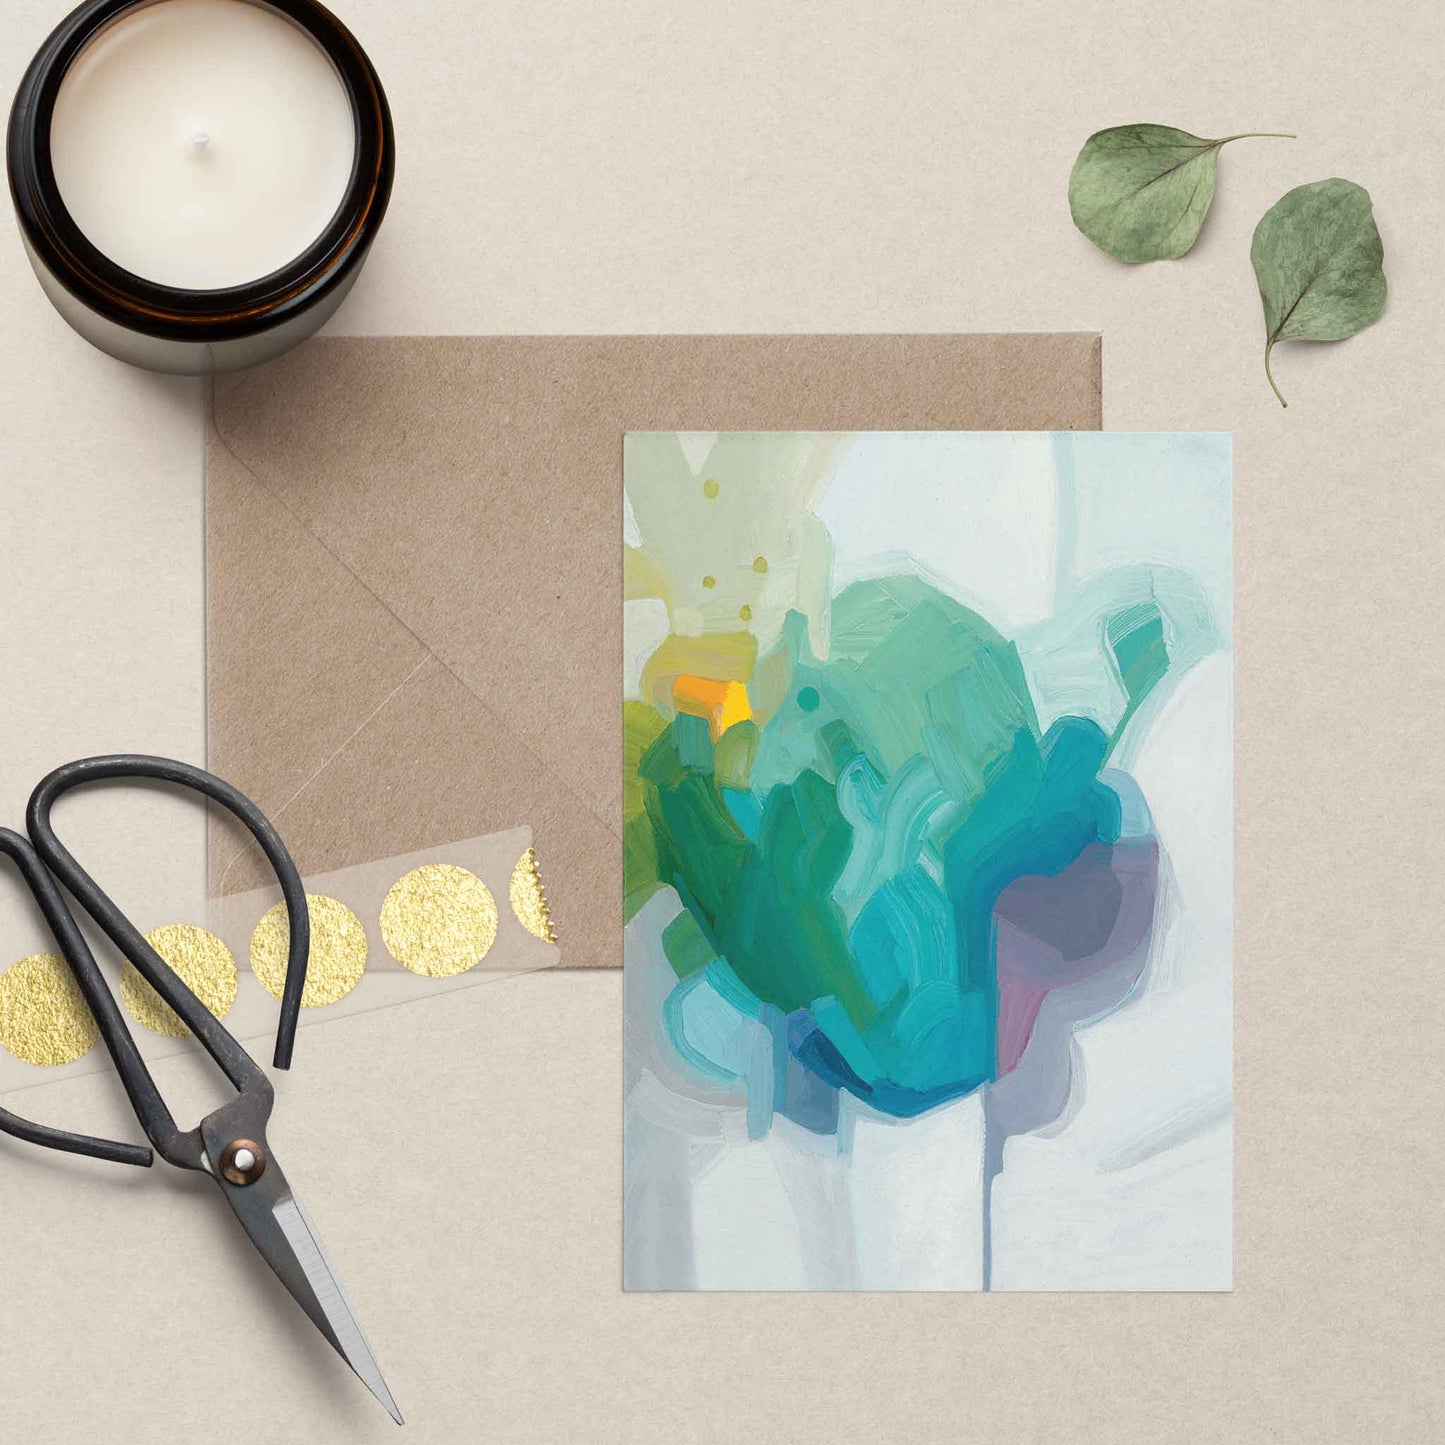 blank greeting cards UK with seafoam green abstract artwork and kraft envelope